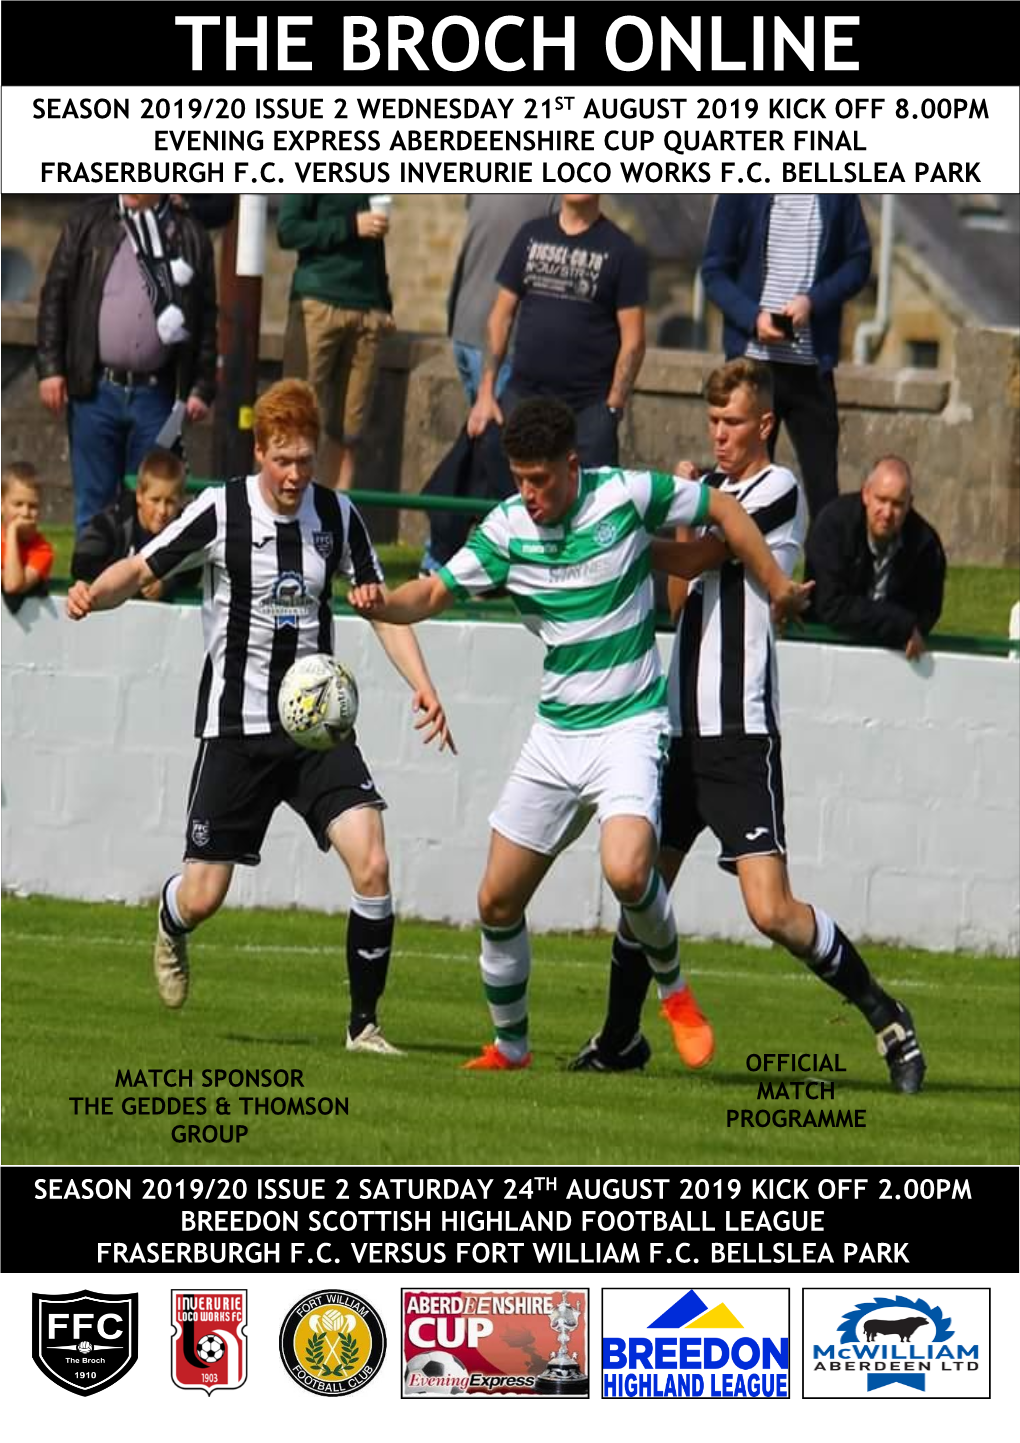 The Broch Online Season 2019/20 Issue 2 Wednesday 21St August 2019 Kick Off 8.00Pm